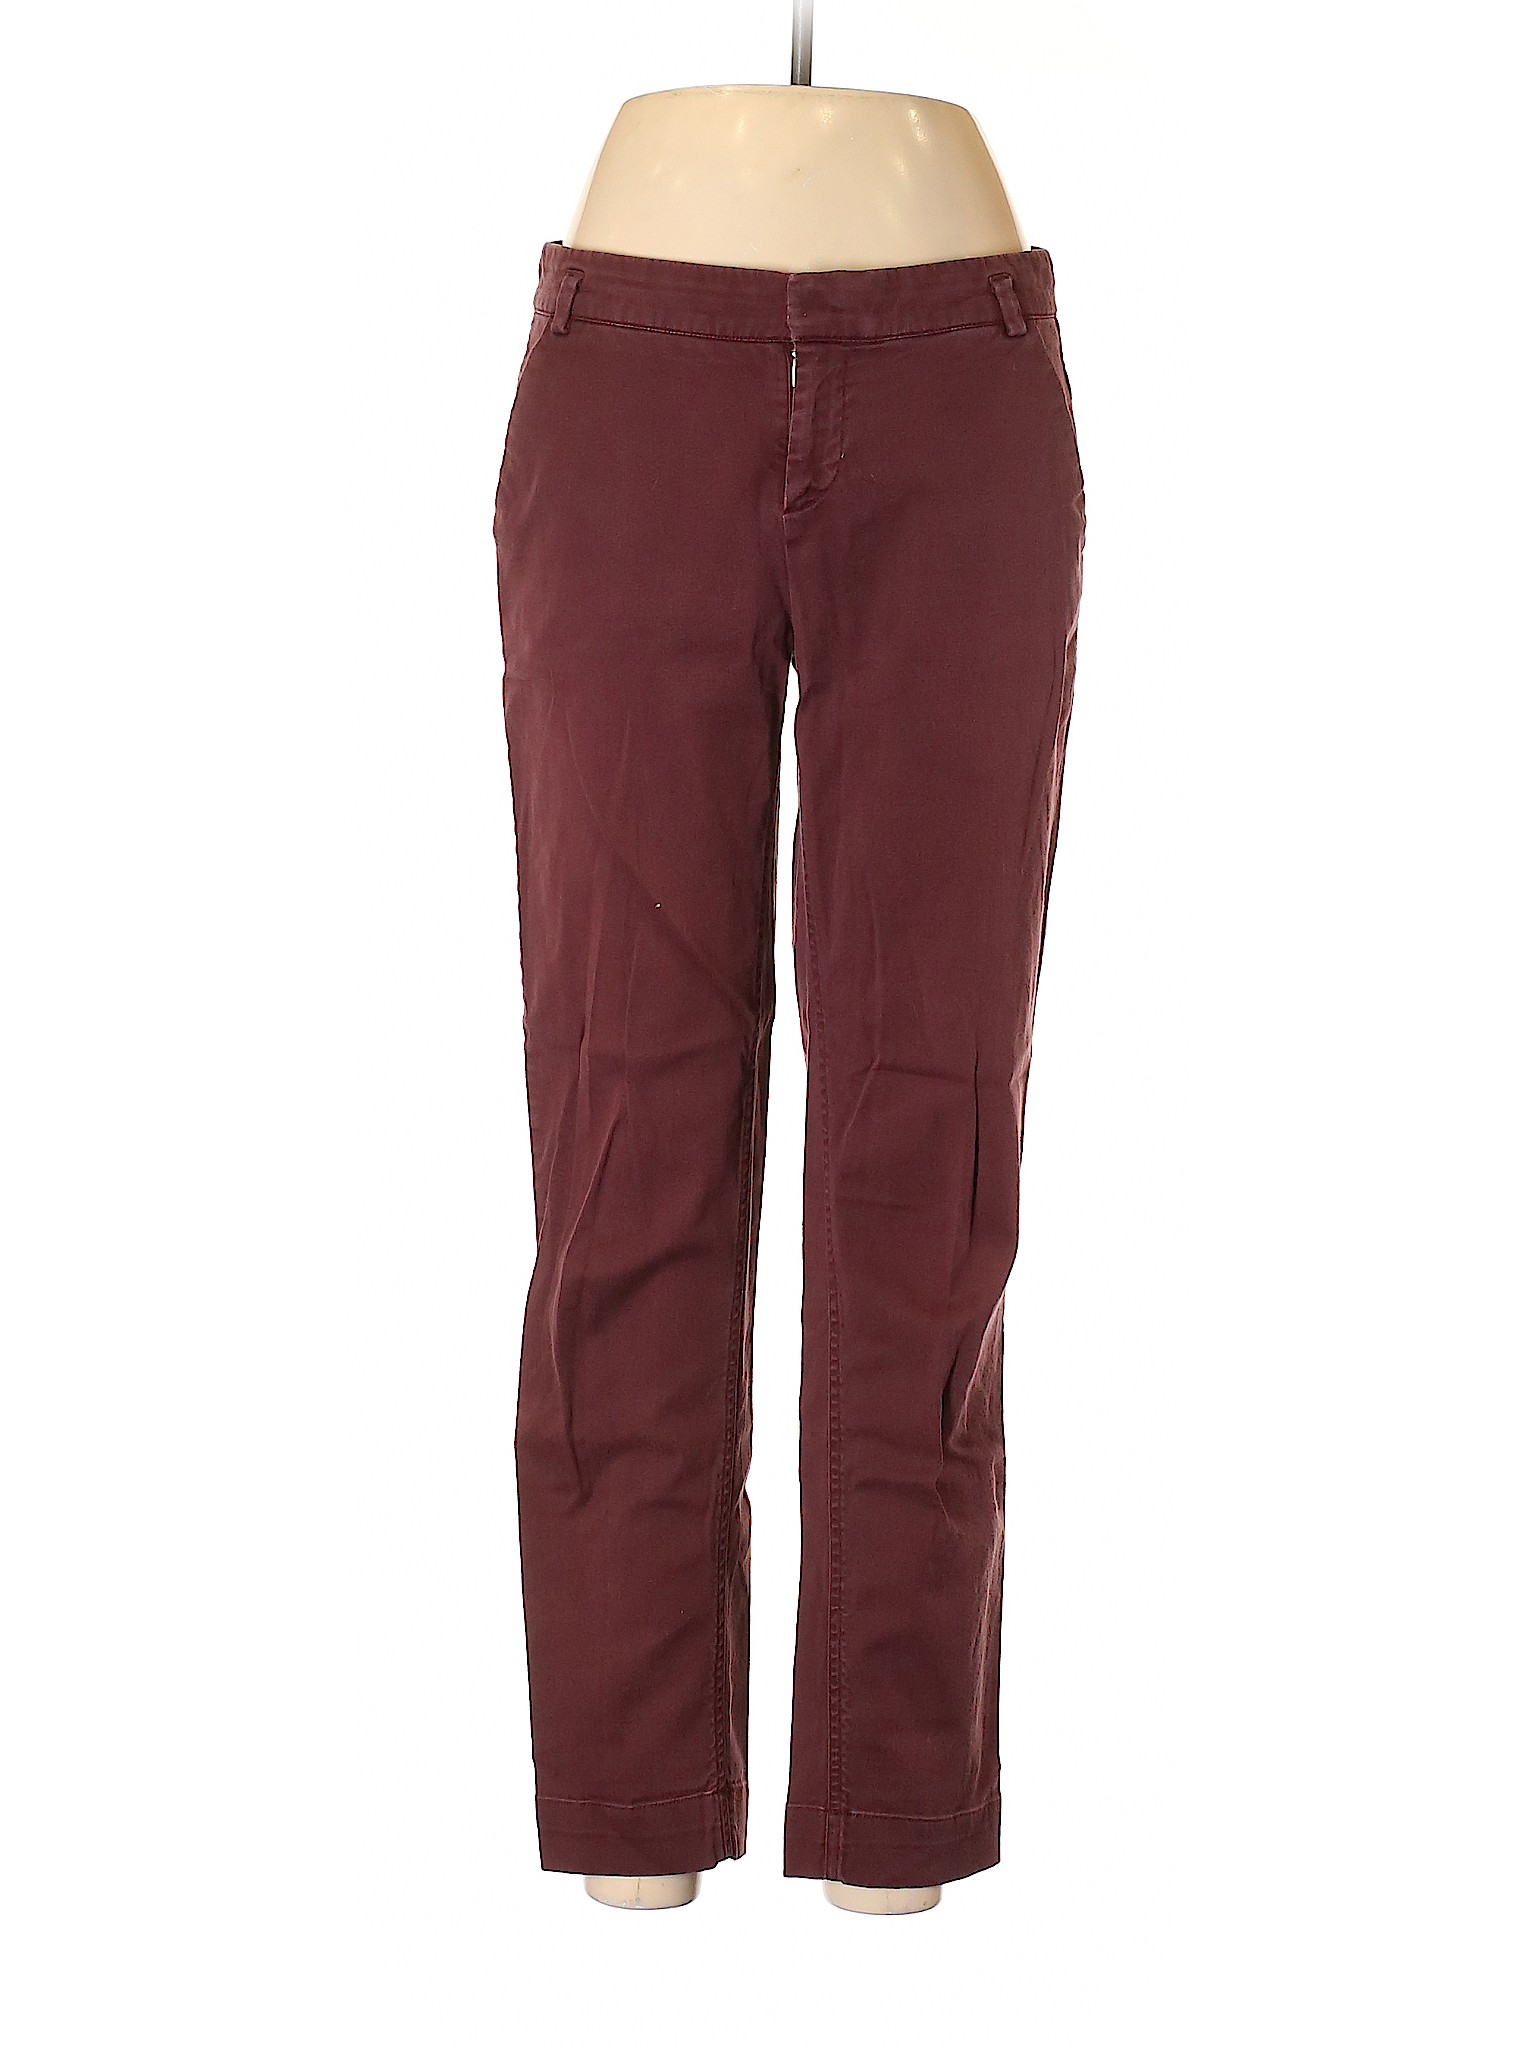 Crosby Women's Pants On Sale Up To 90% Off Retail | thredUP